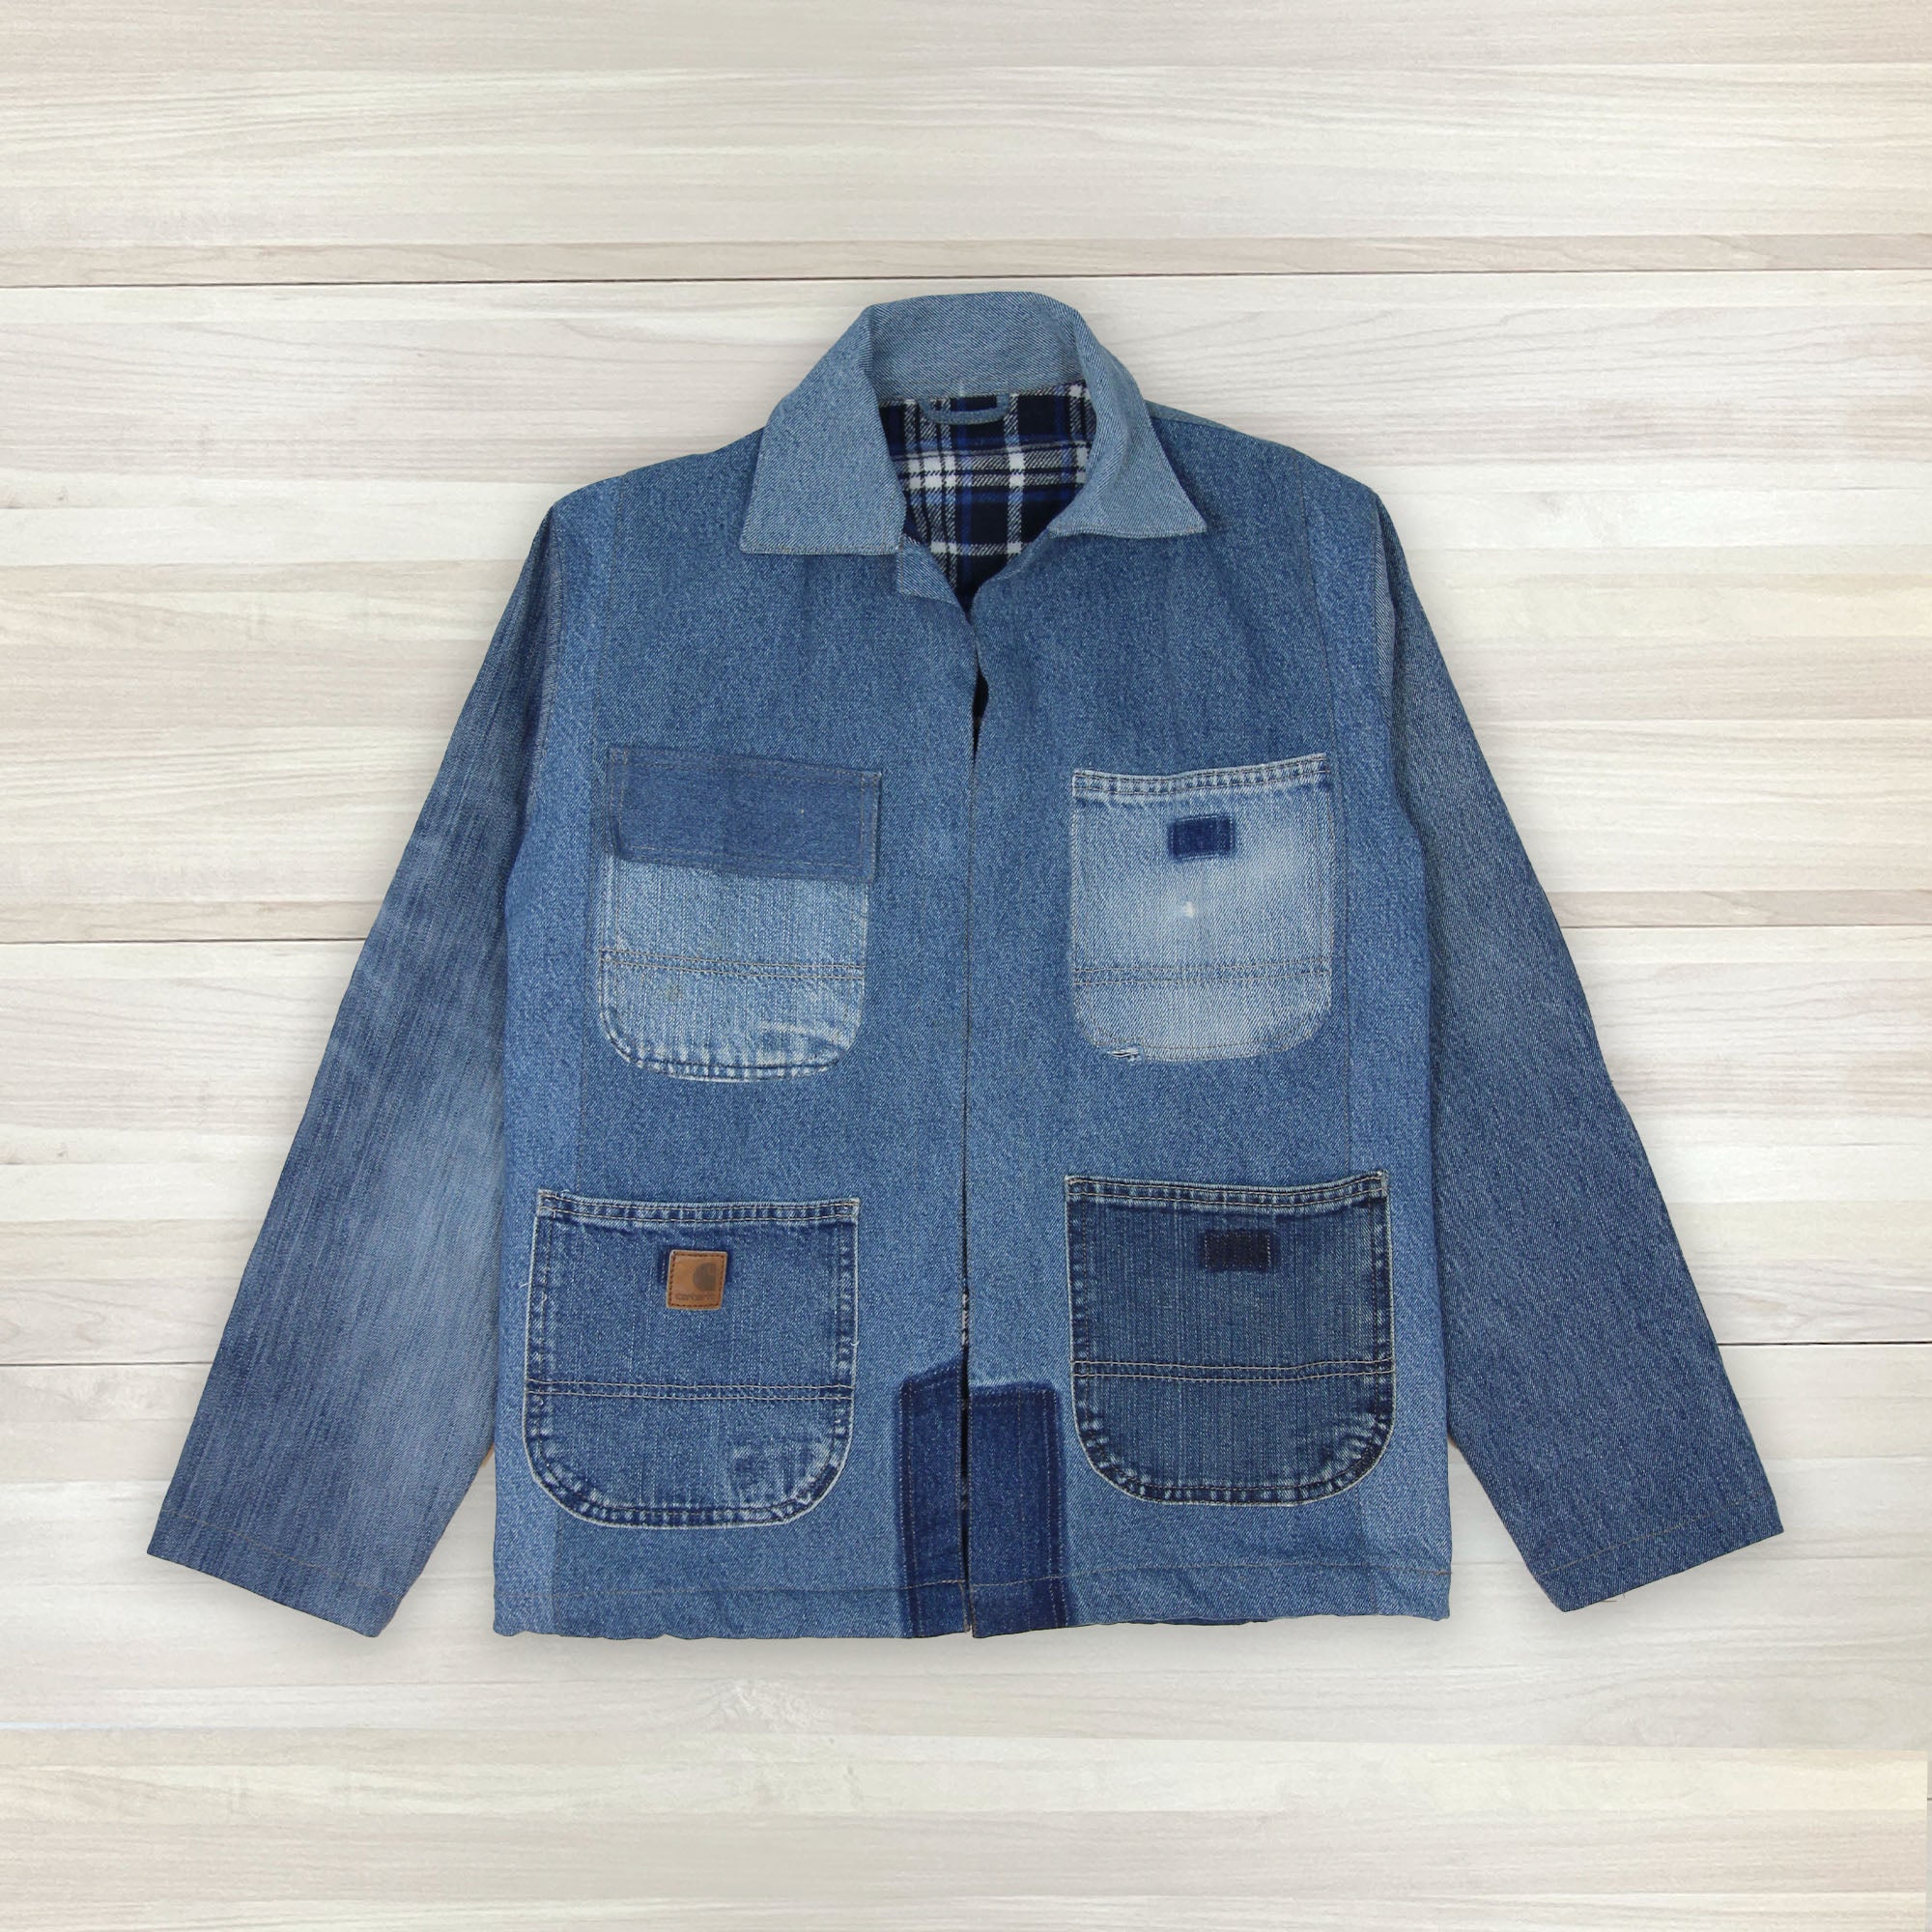 Chore Coat Made From Recycled Carhartt Work Jeans - Small / Medium-1